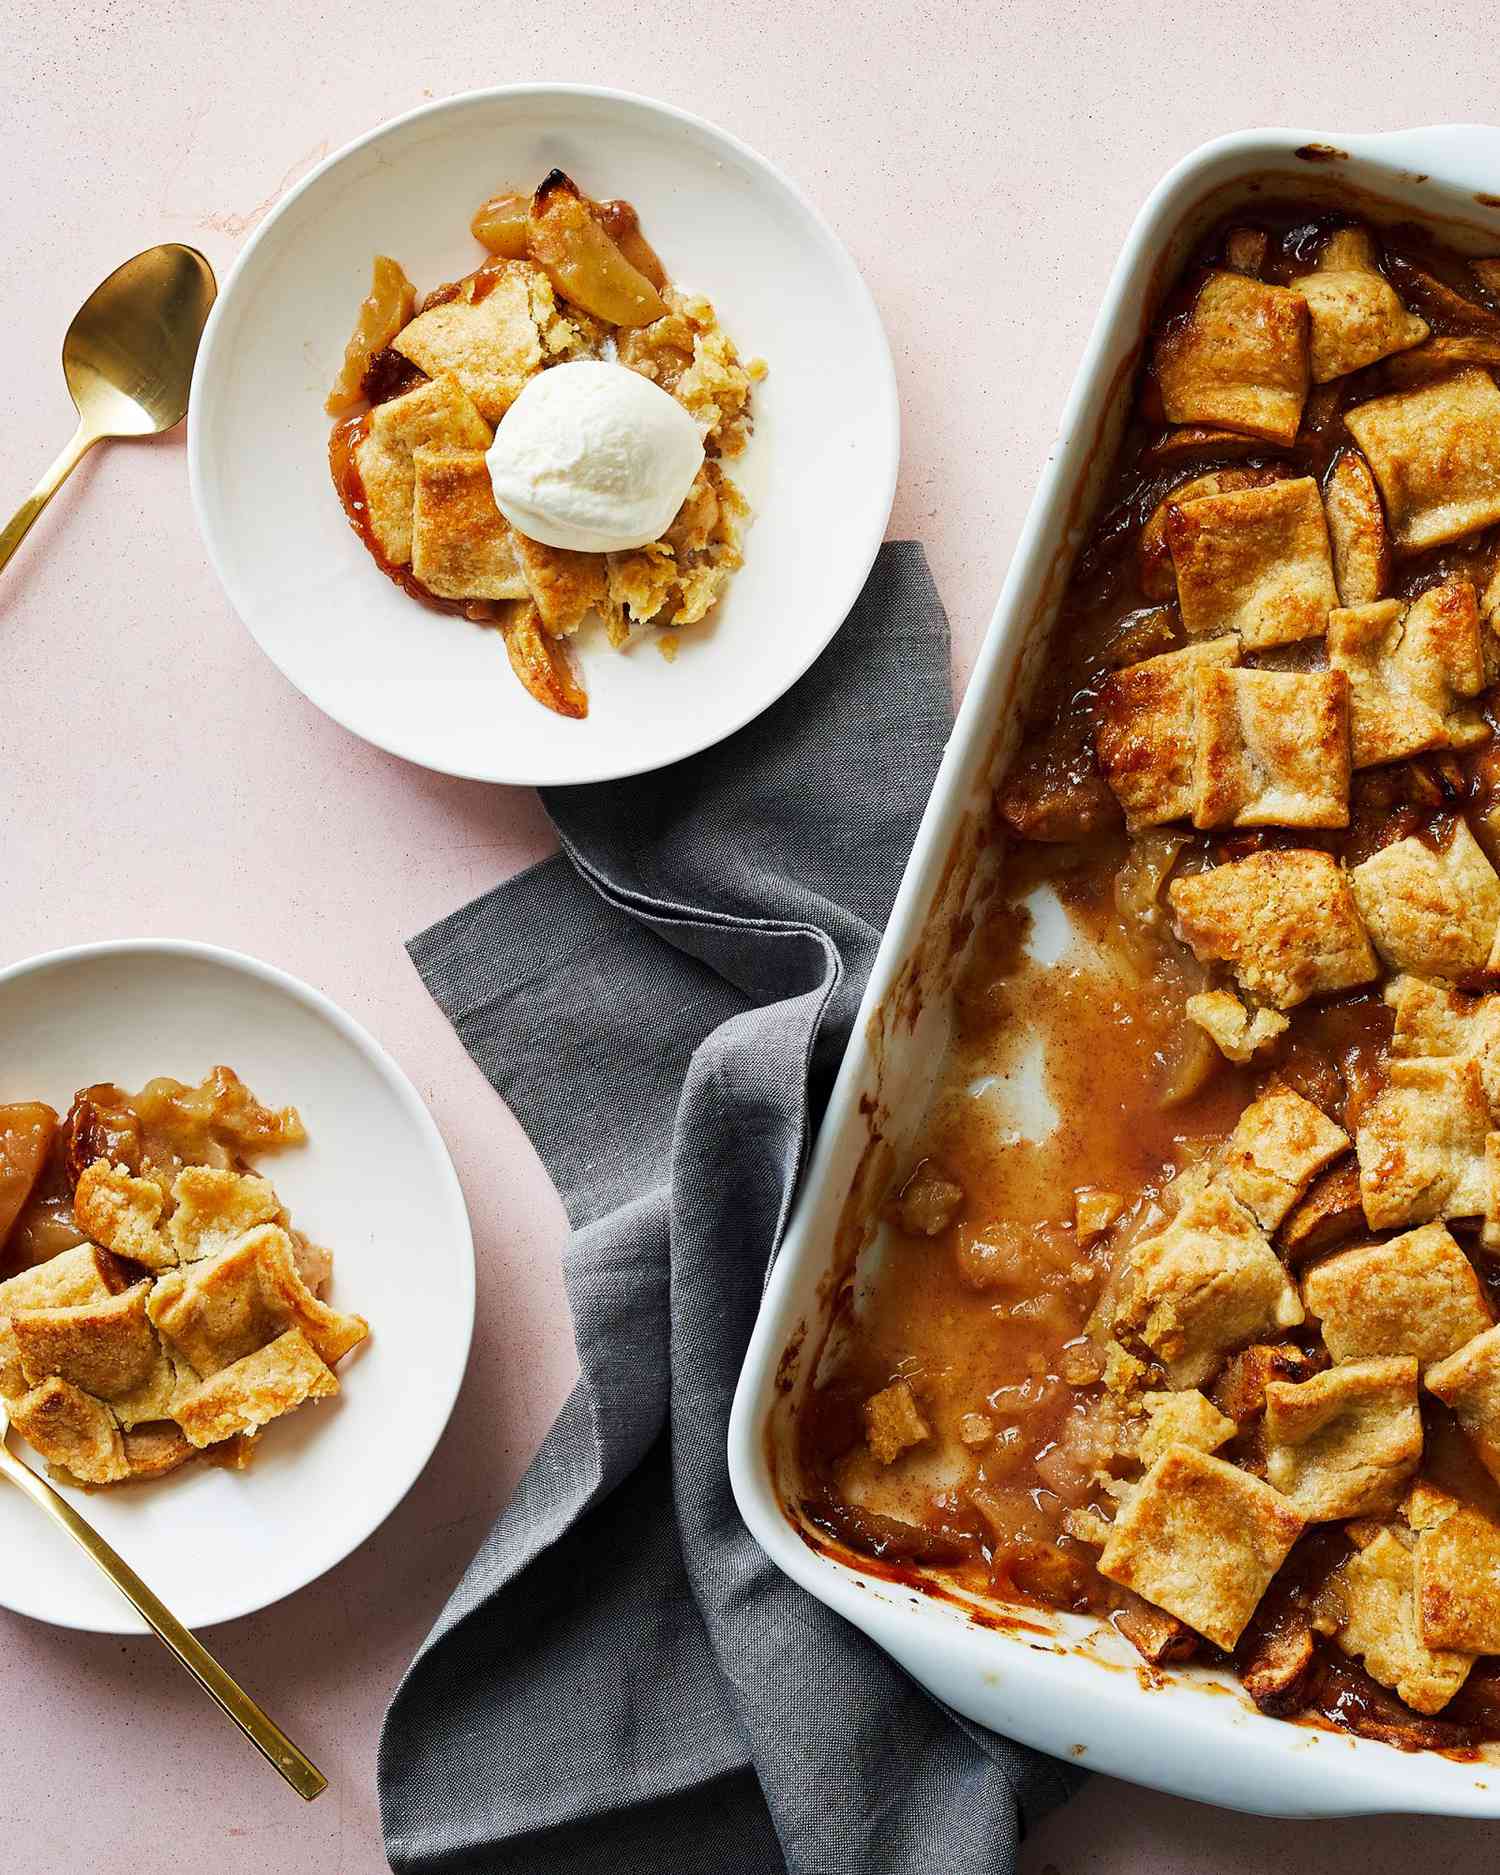 30 Classic Fall Dessert Recipes Starring Apples, Pears, Pumpkins, and More